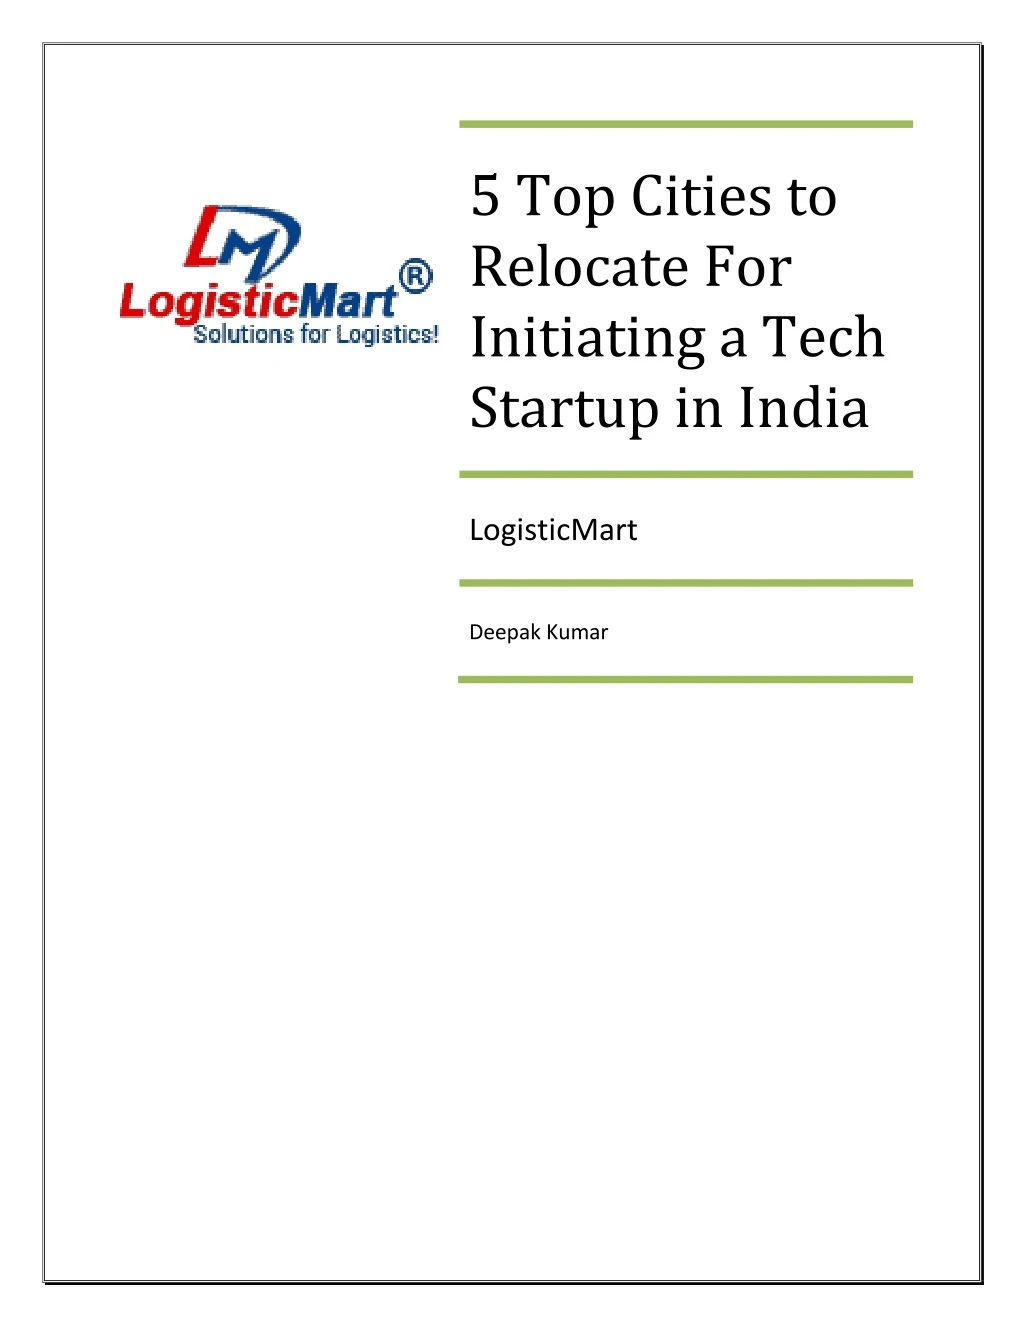 5 top cities to relocate for initiating a tech